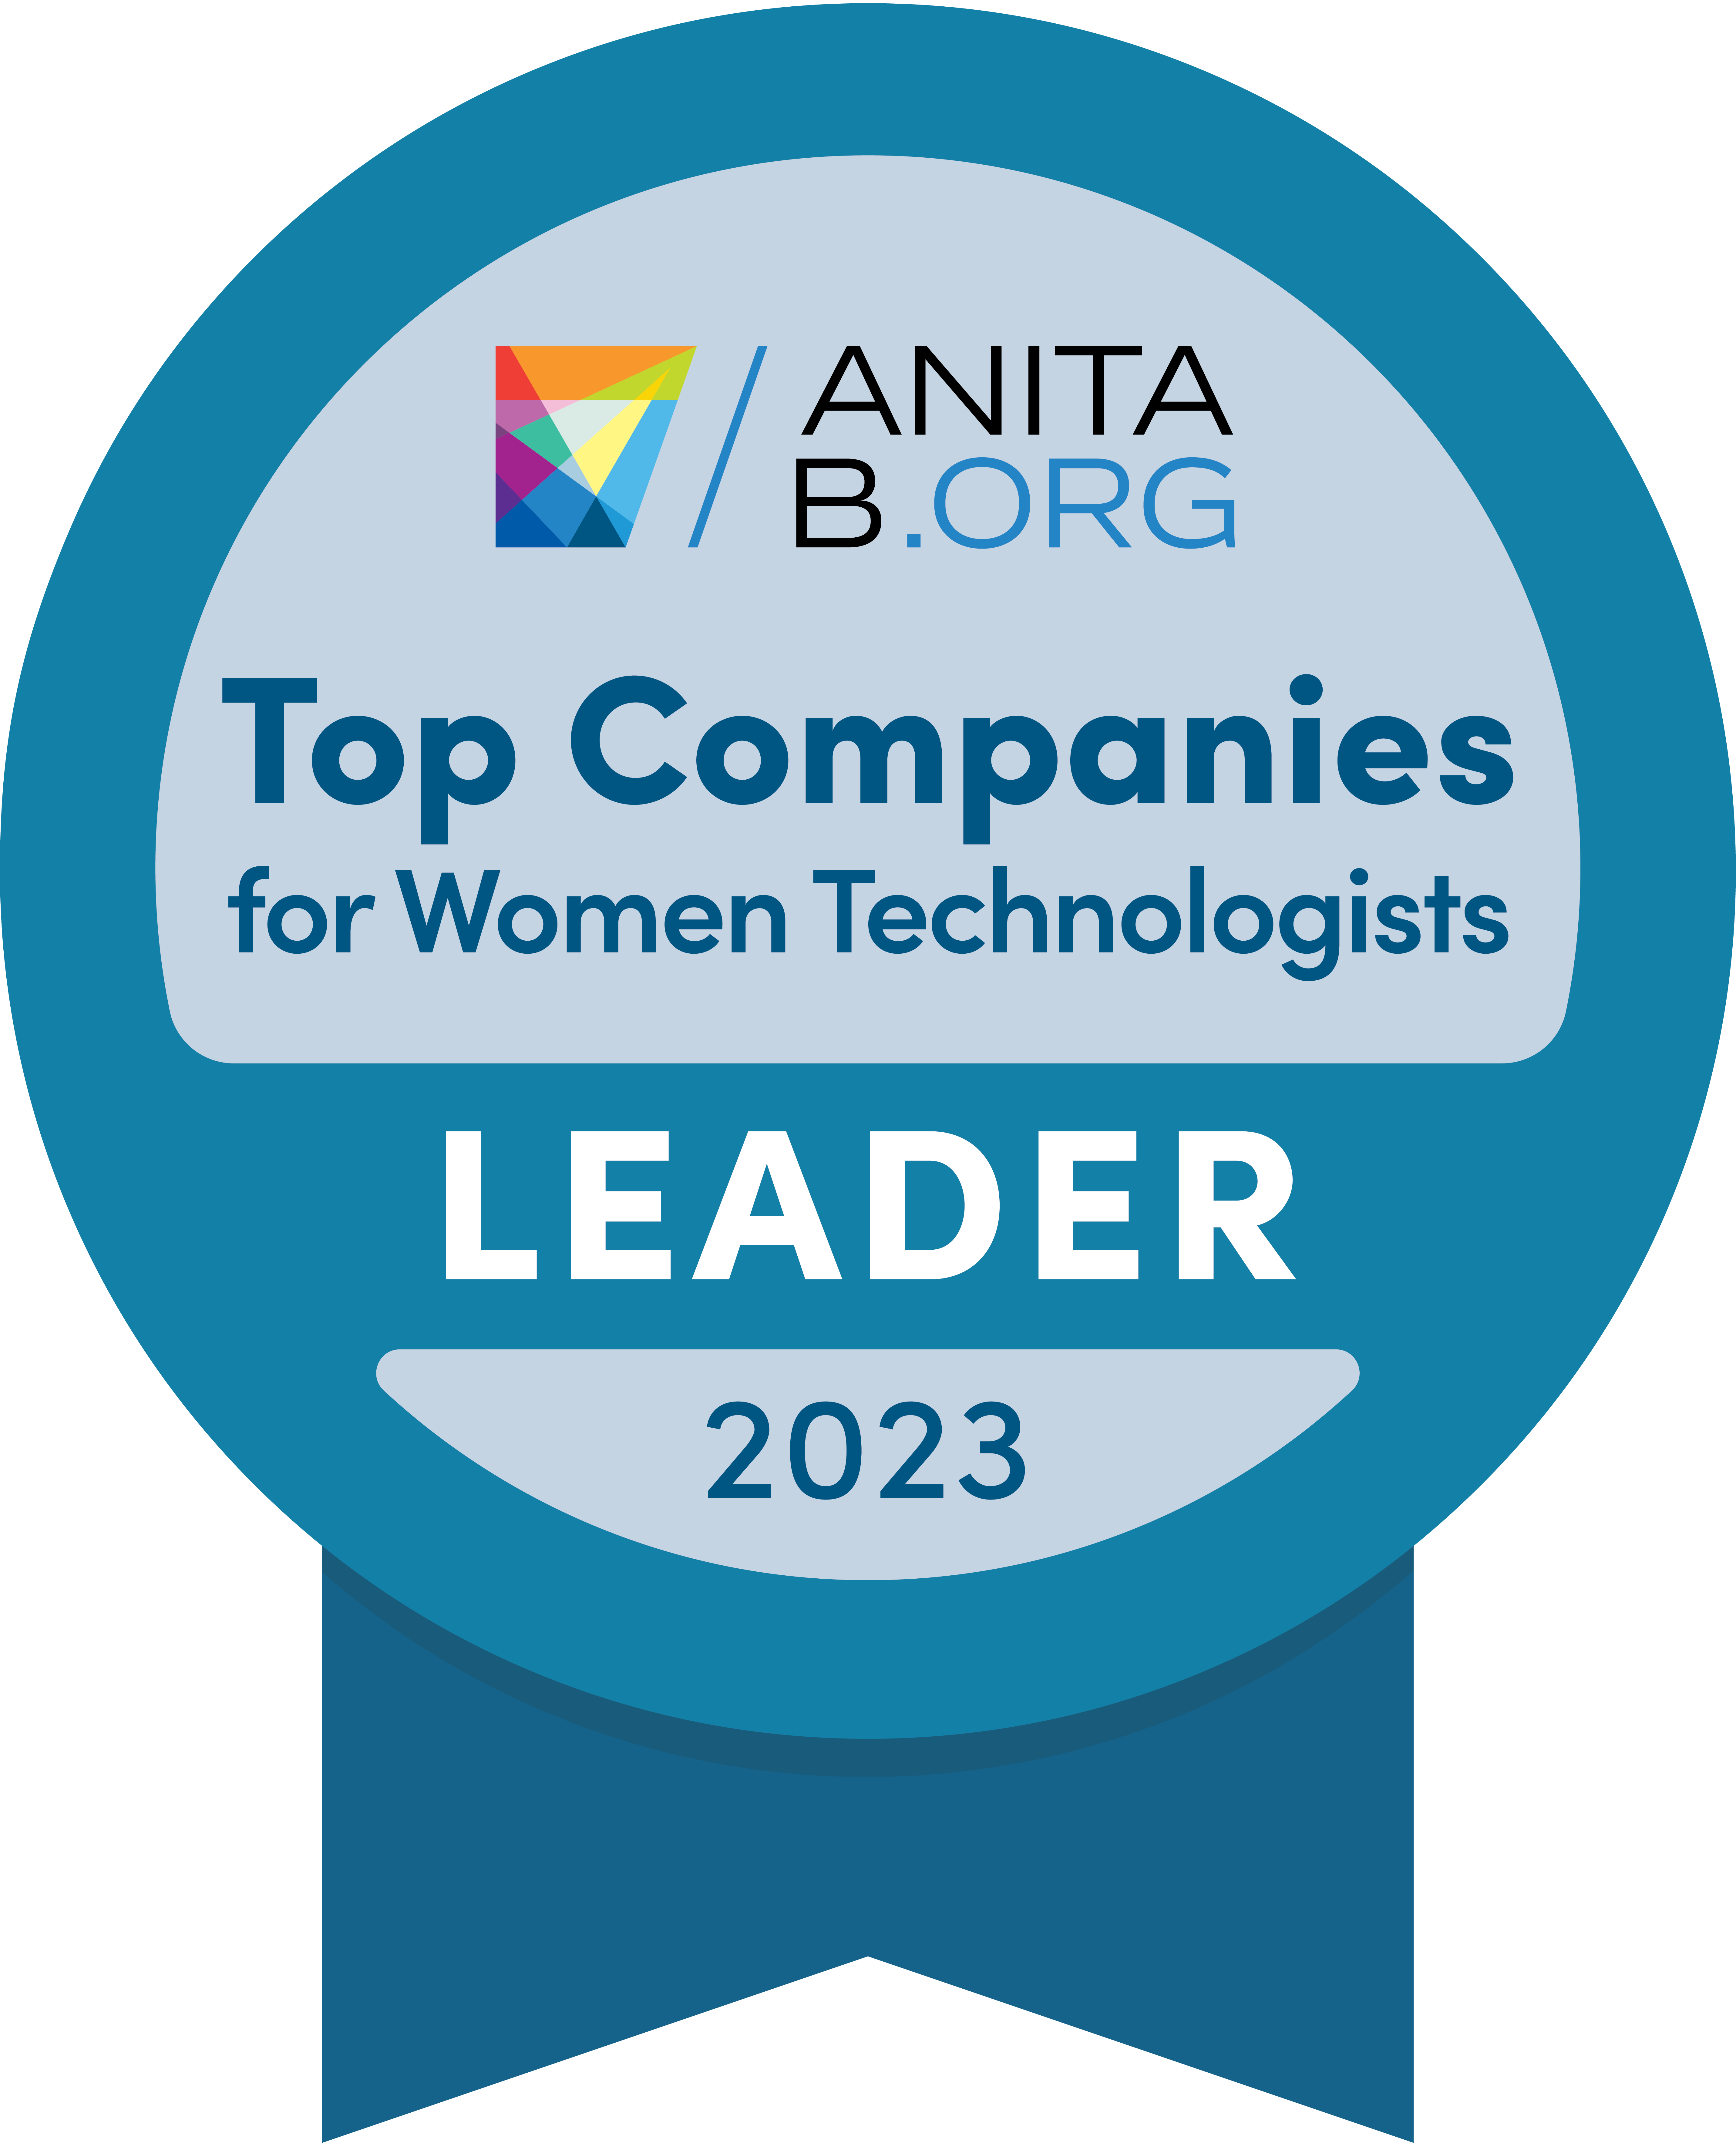 AnitaB.org - Top Companies for Women Technologists - Leader Award 2023  